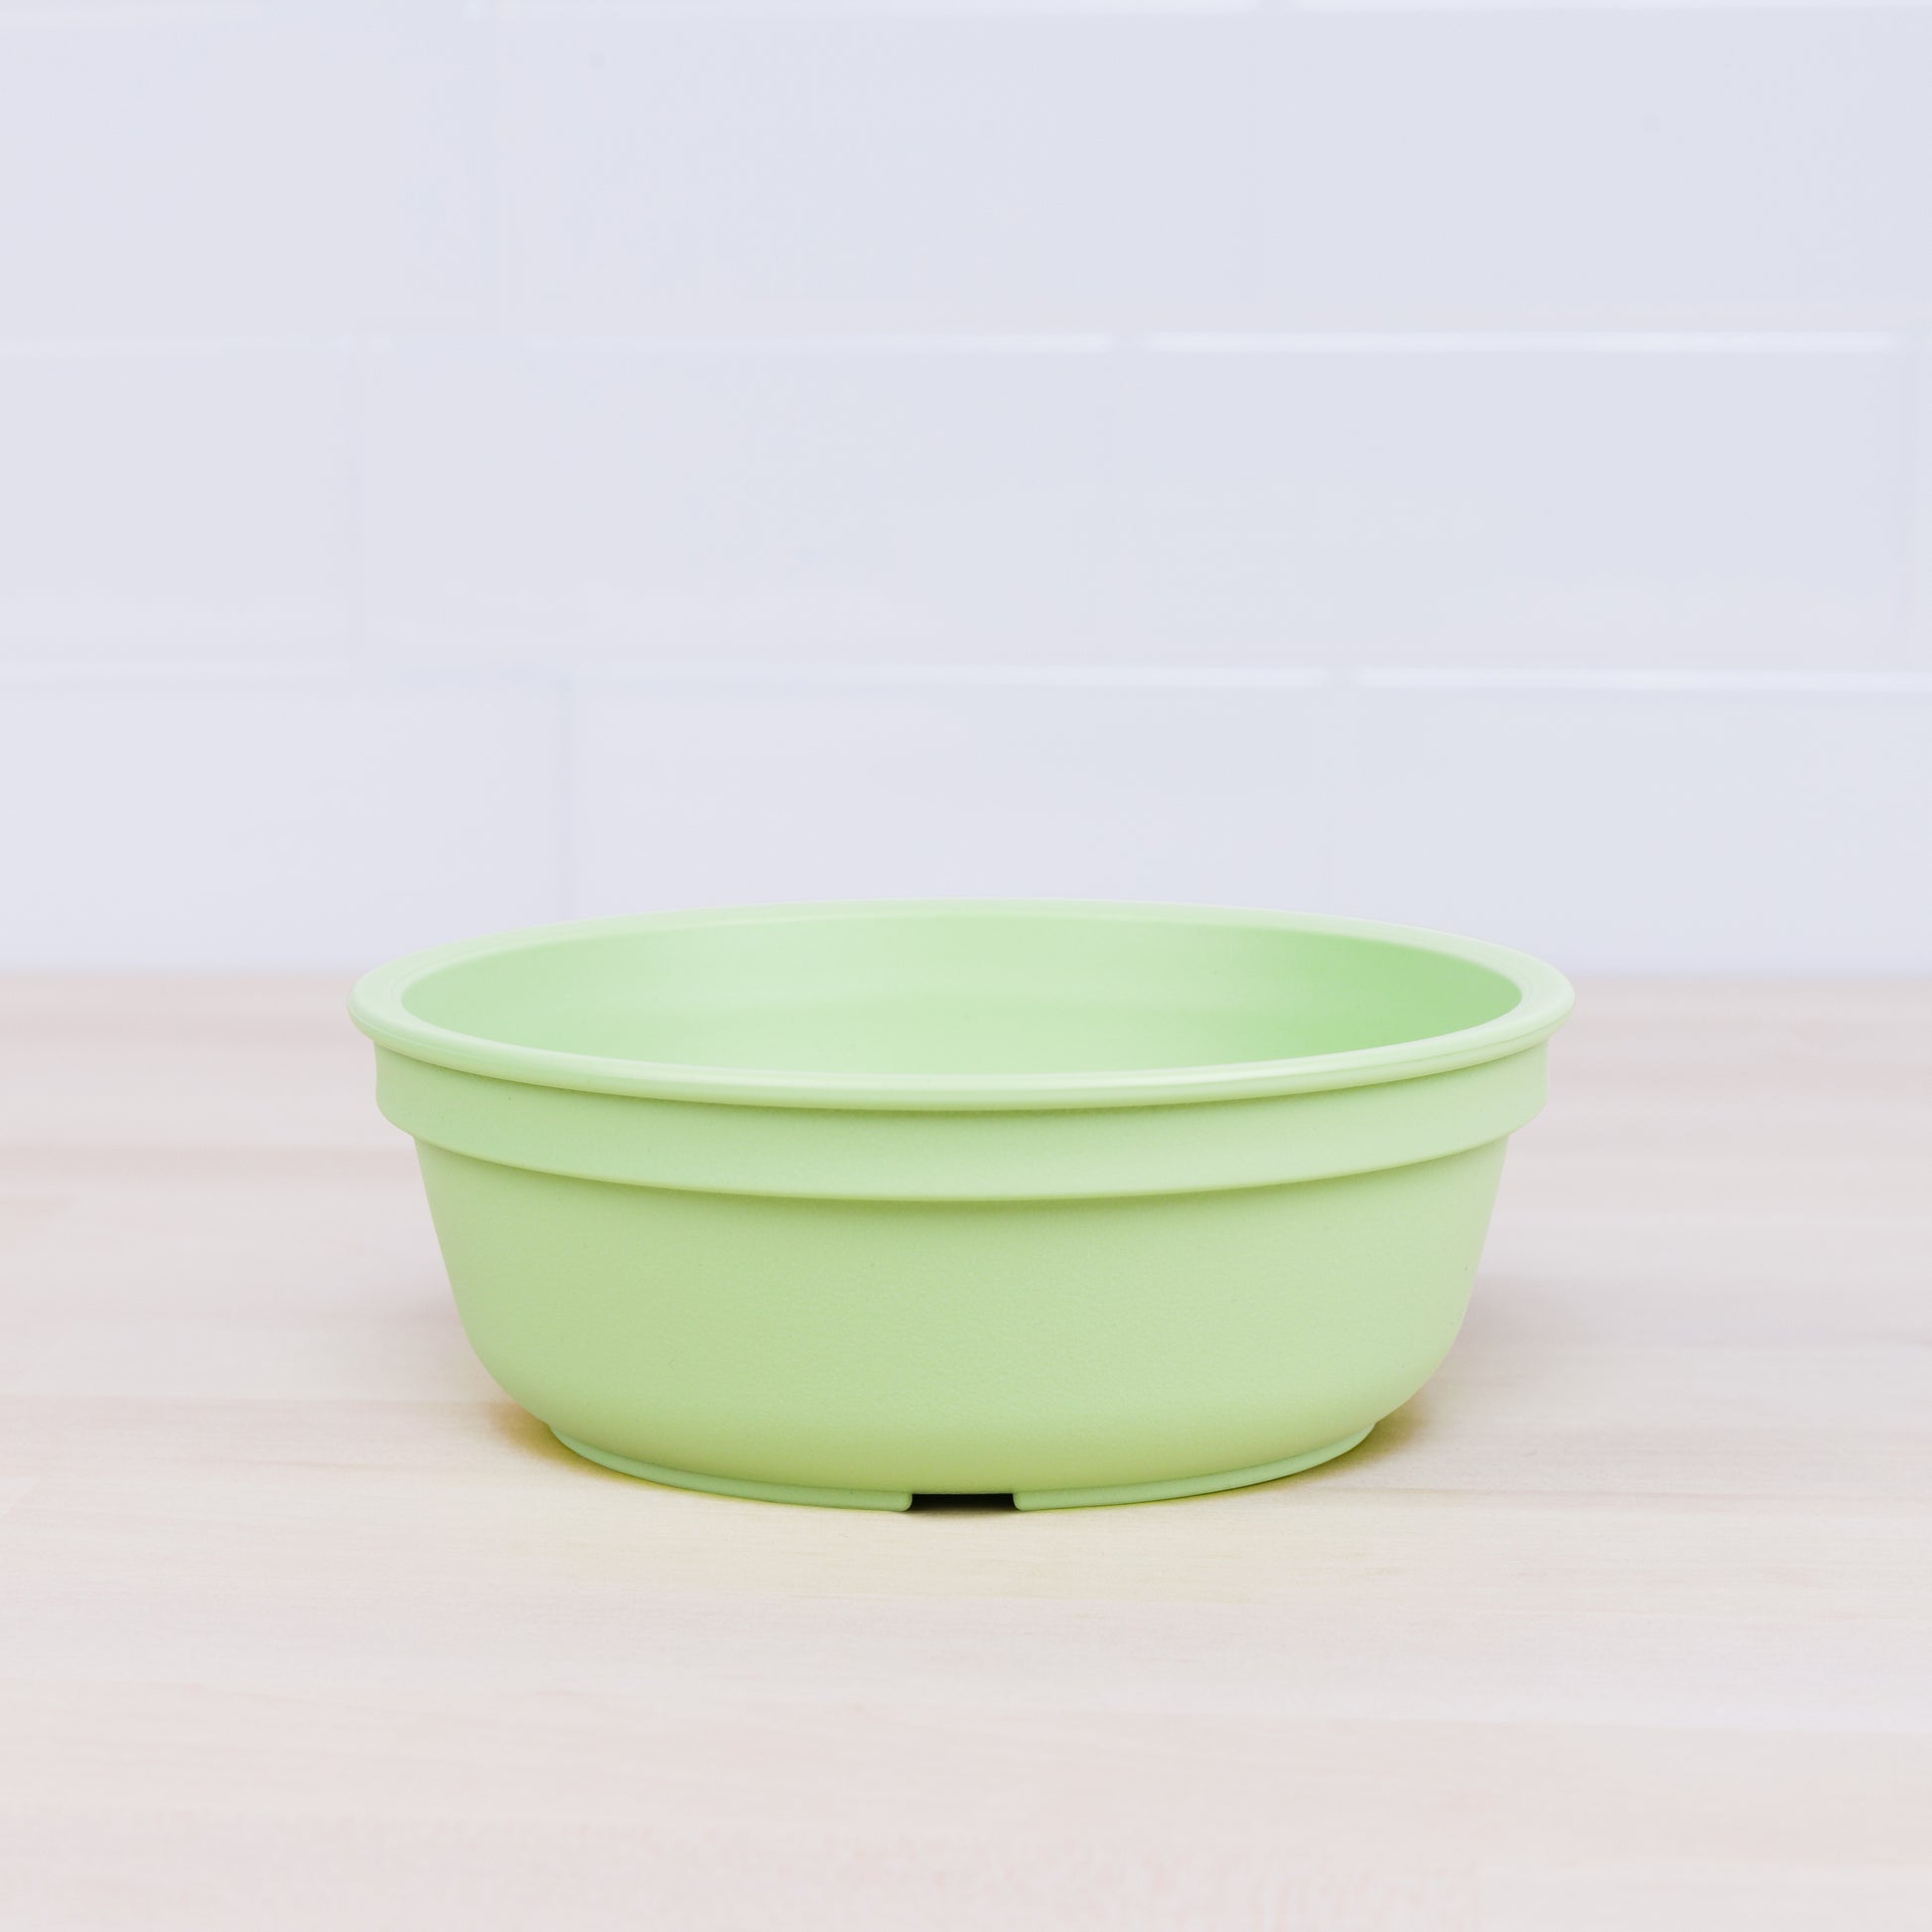 Re-Play Bowl | Standard Size in Leaf from Bear & Moo